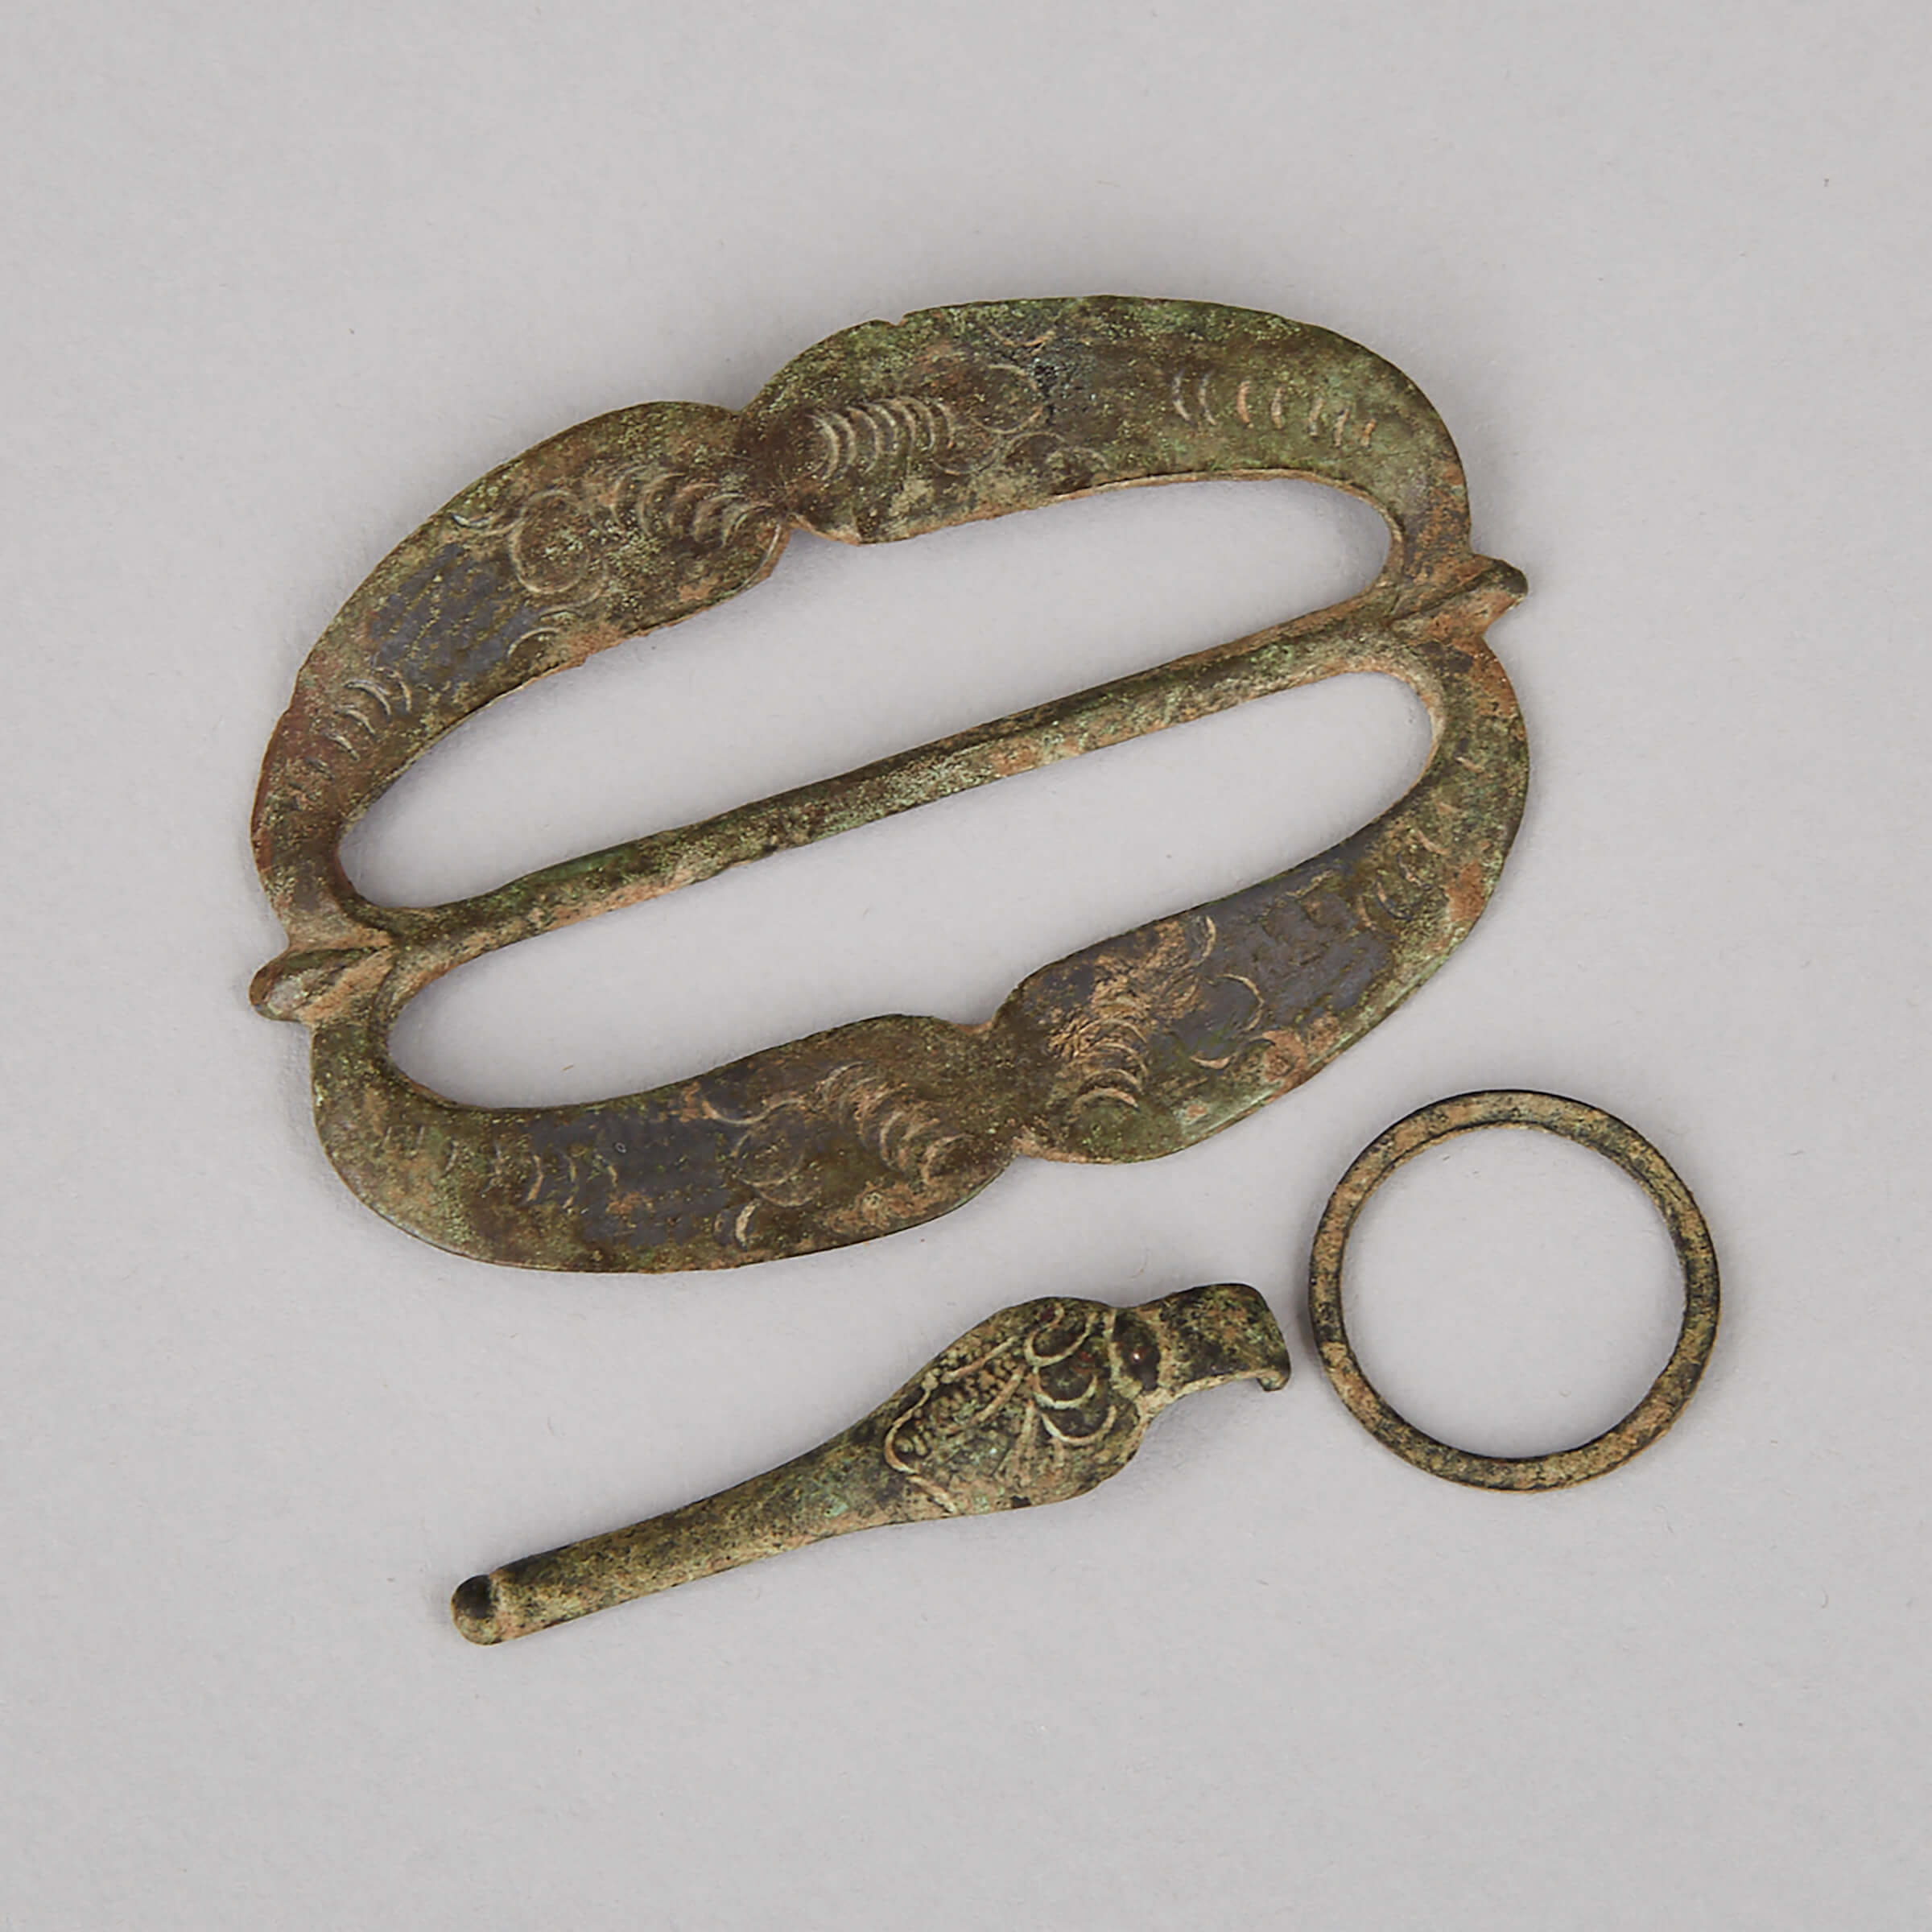 Medieval Saxon Spectacle Buckle, 1350-1500